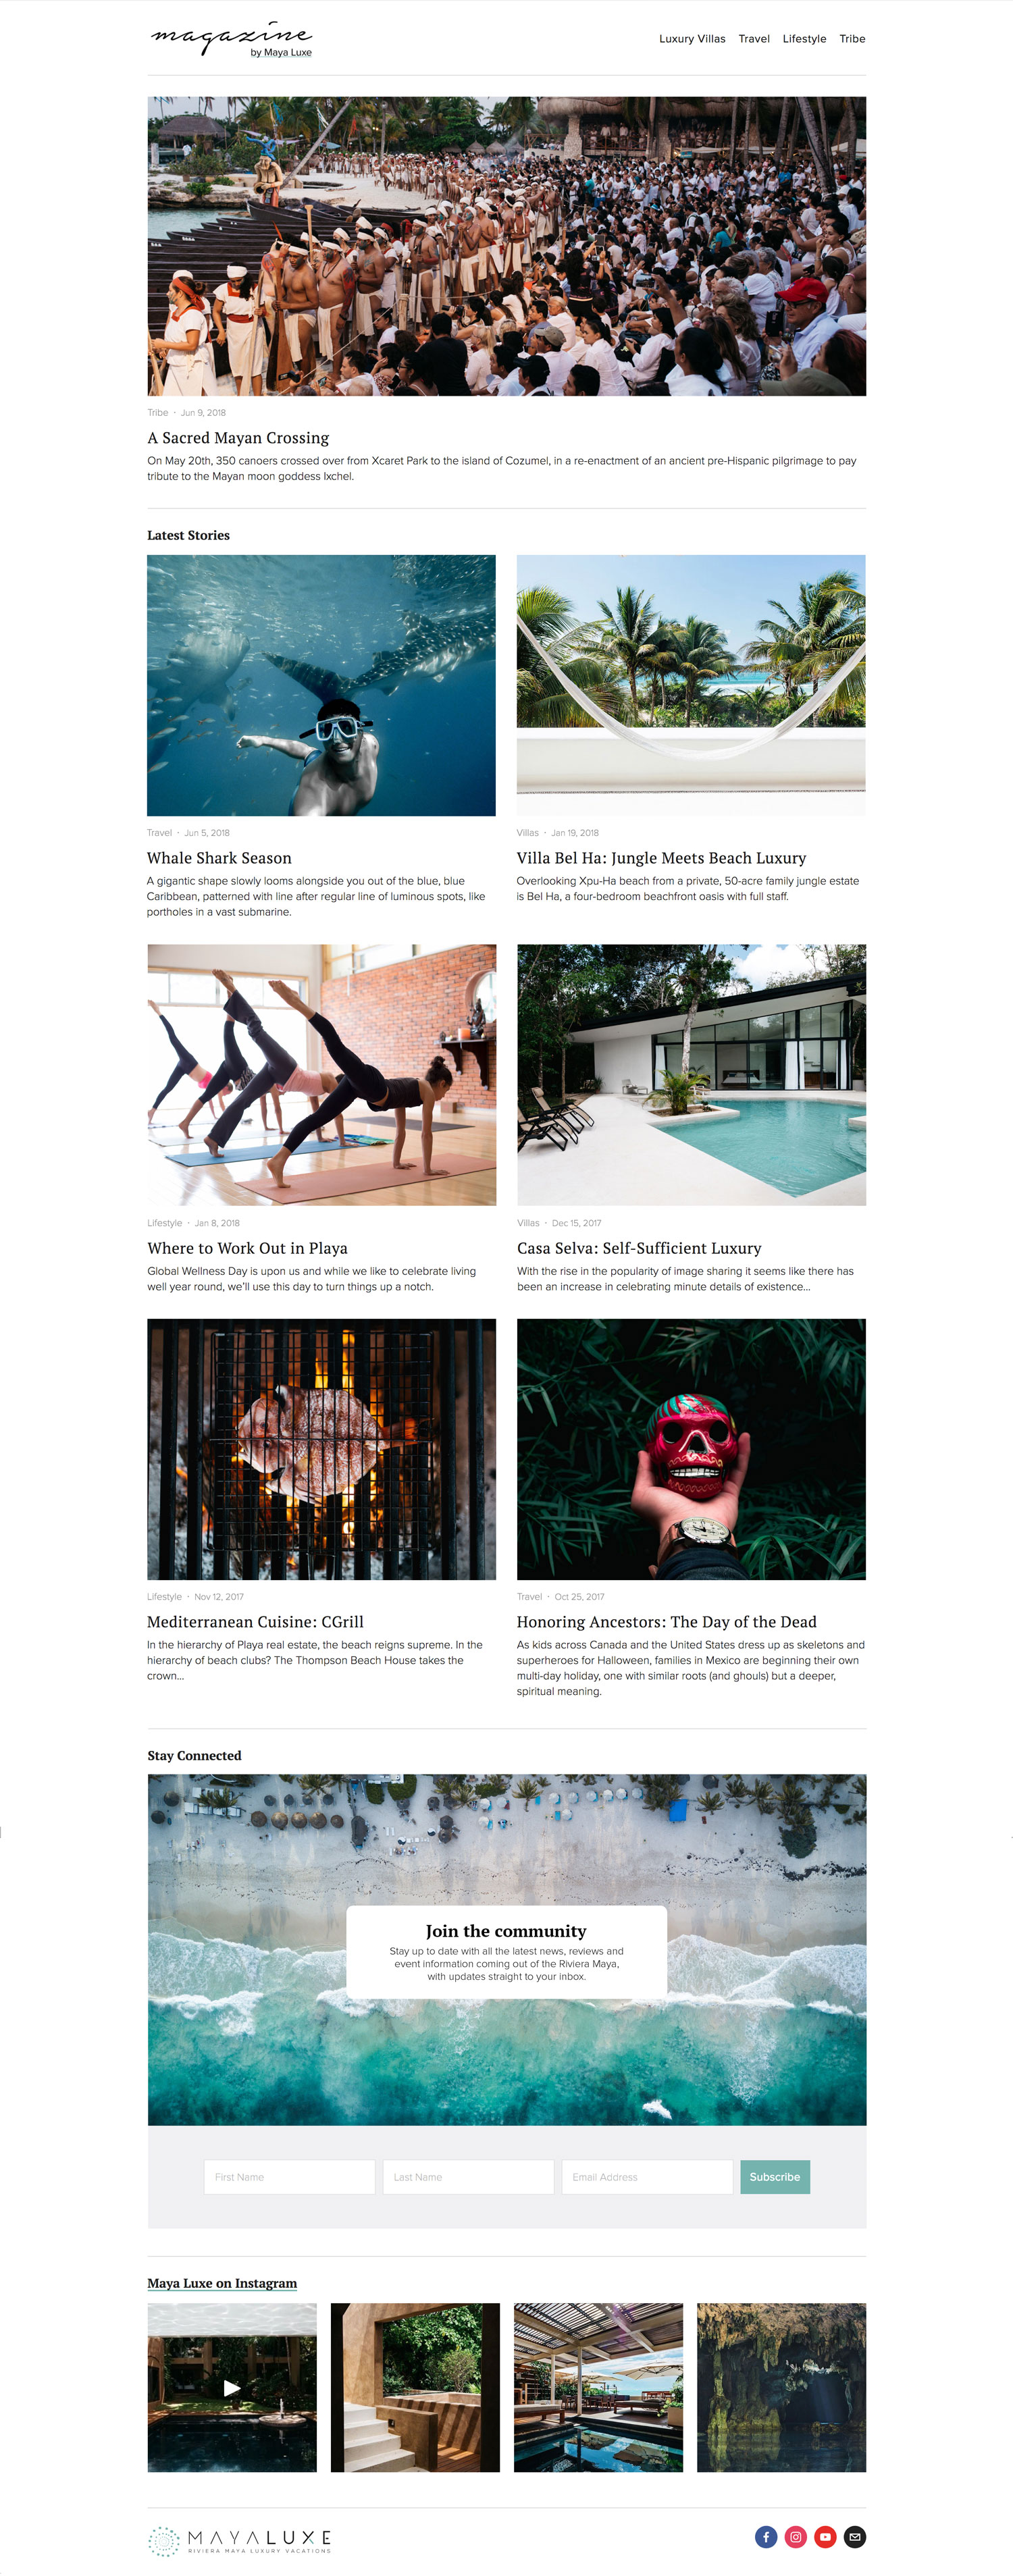 The_Ink_Collective_Creative_Content_Agency_Paris_Sydney_Design_Editorial_Strategy_Web_Design_Photography_Maya_Luxe_Magazine_Riviera_Maya_Mexico_1.jpg